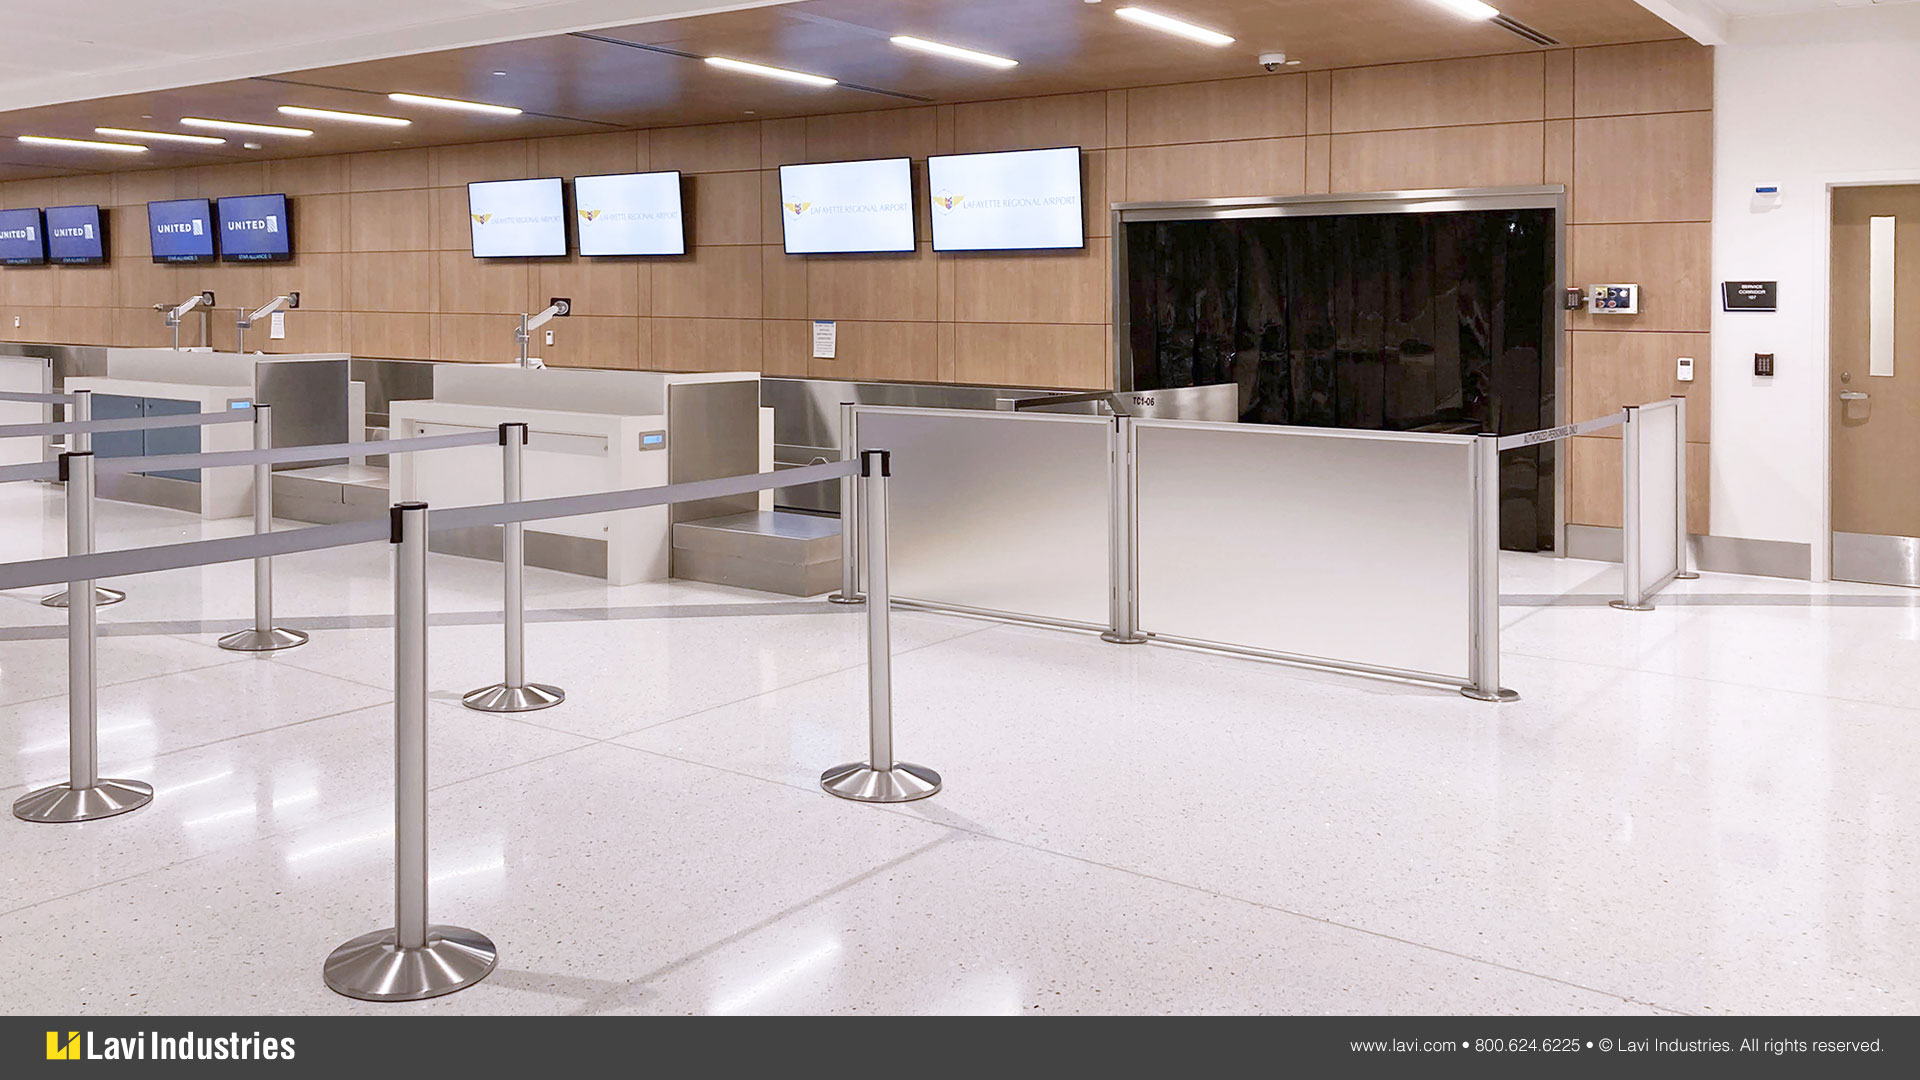 Airport,Barriers,Queuing,Stanchions,Banners